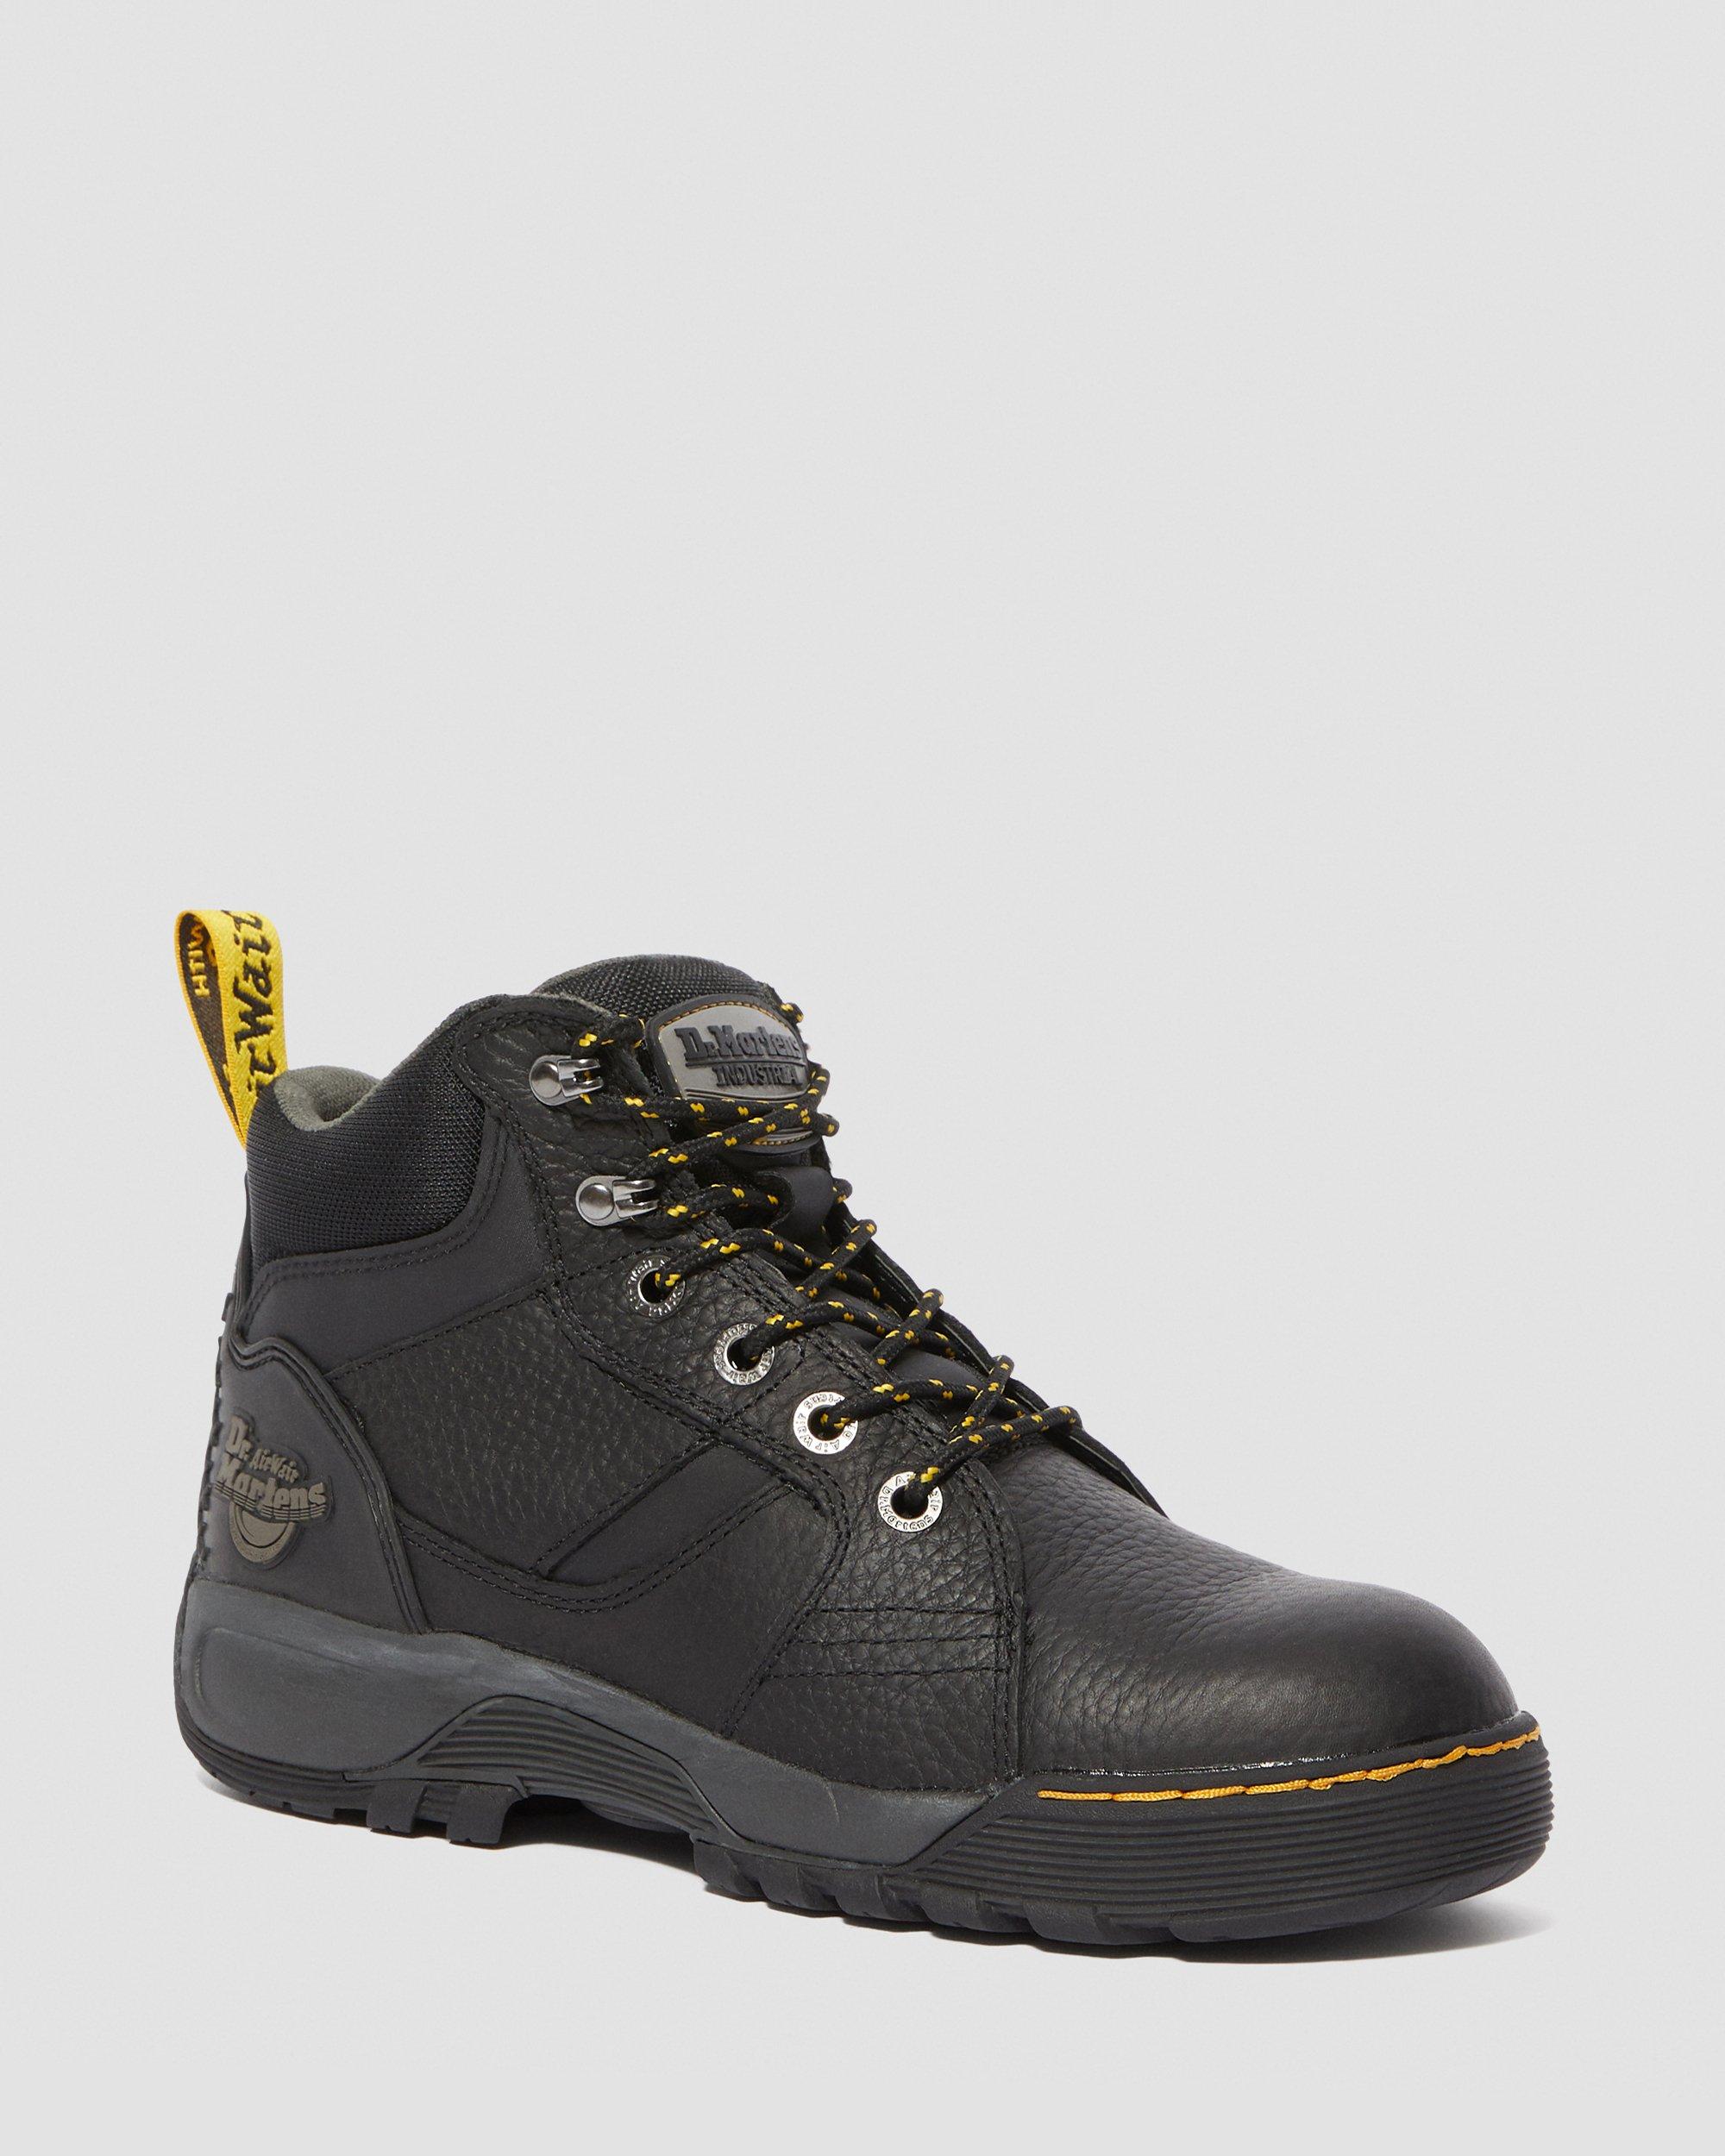 GRAPPLE STEEL TOE BOOTS | Dr. Martens